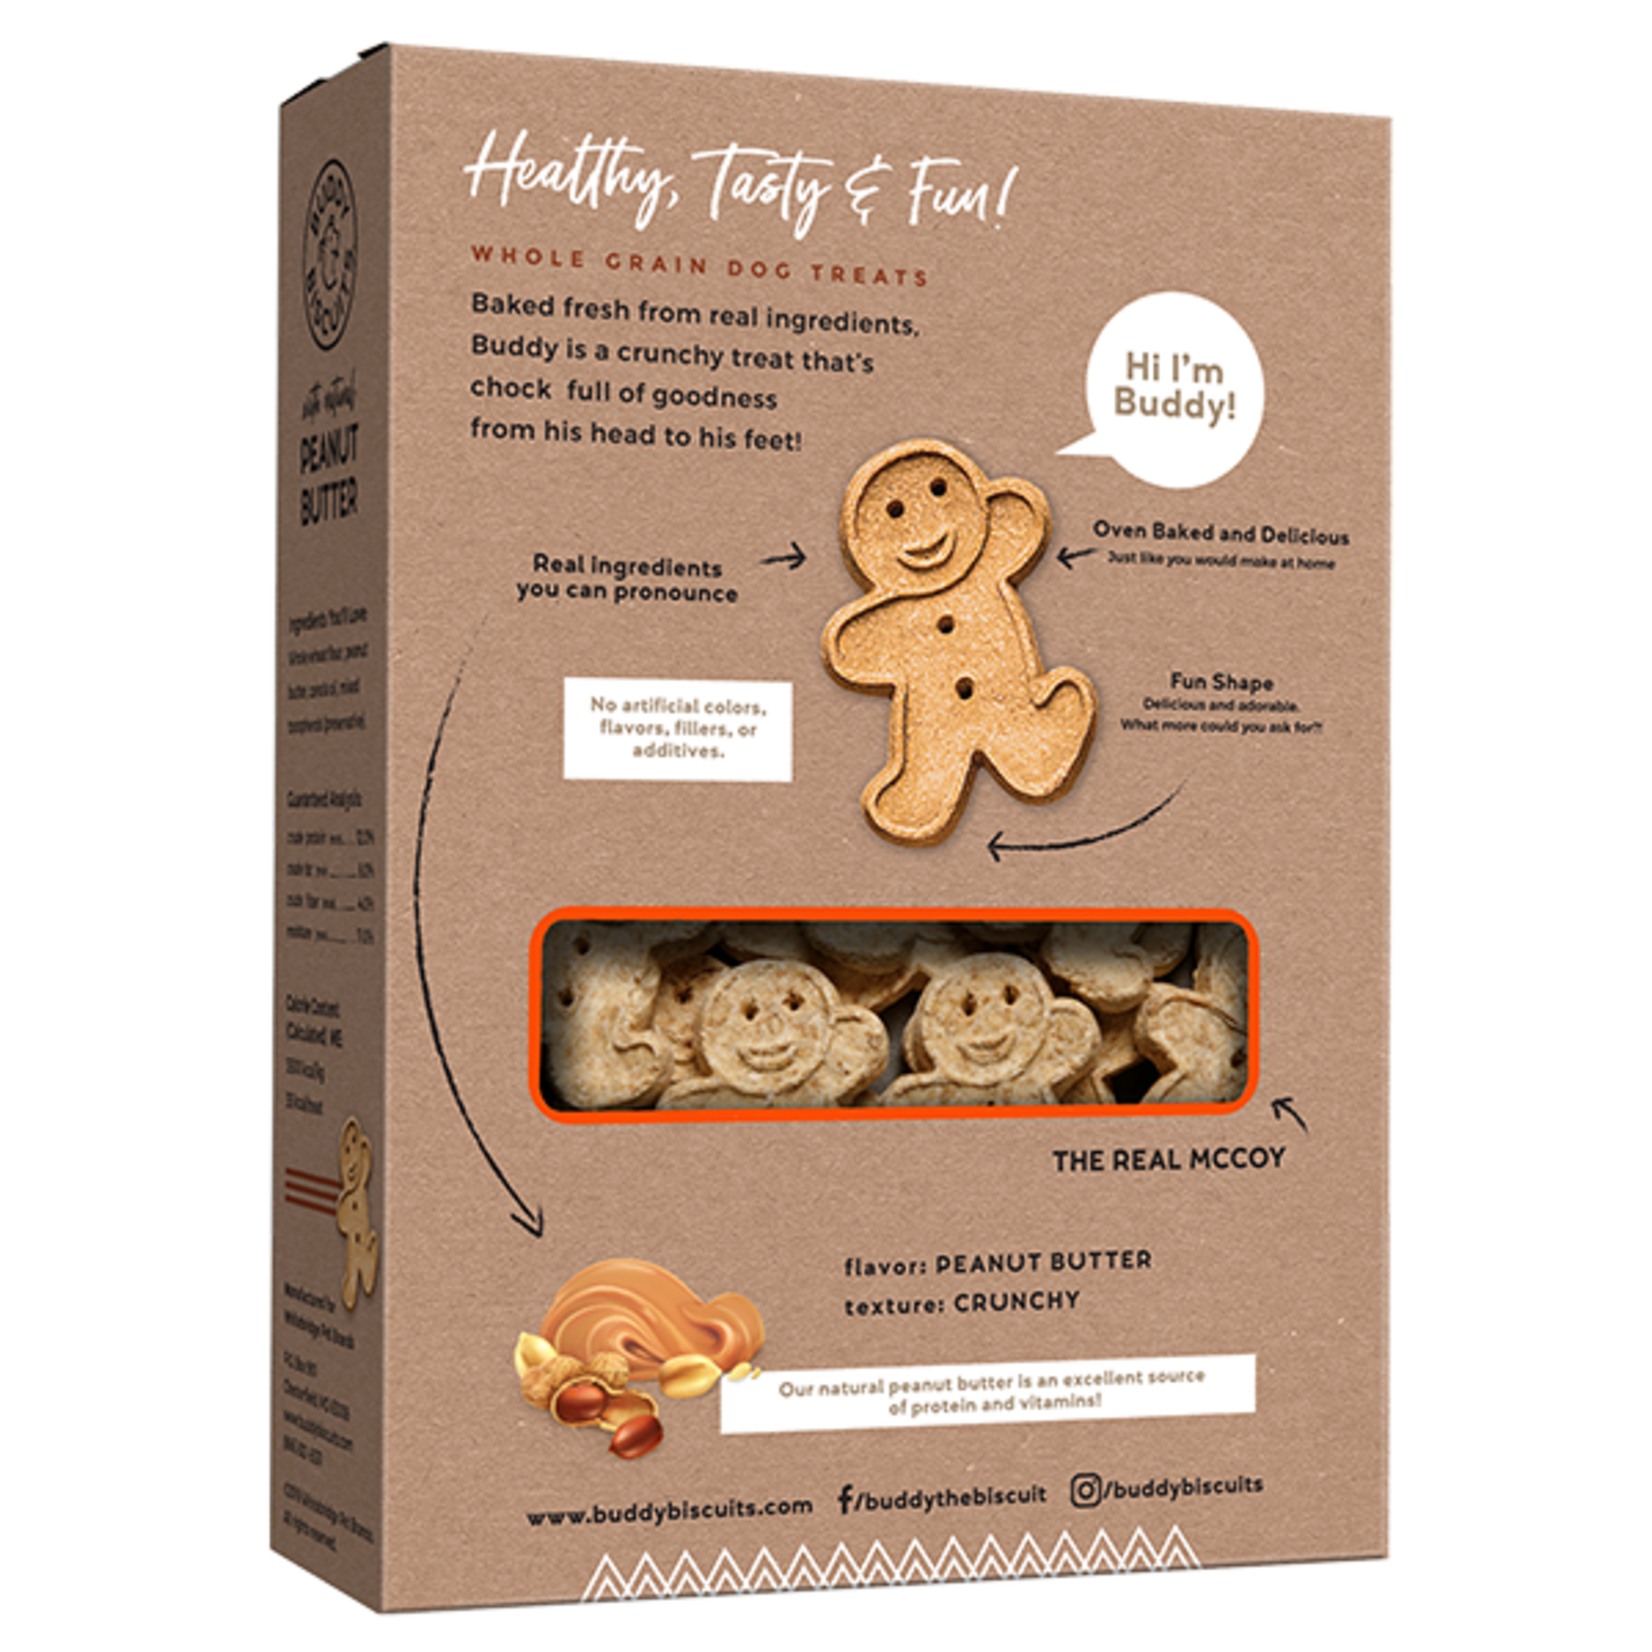 Cloud Star Buddy Biscuits Oven Baked Peanut Butter Dog Treats 16oz